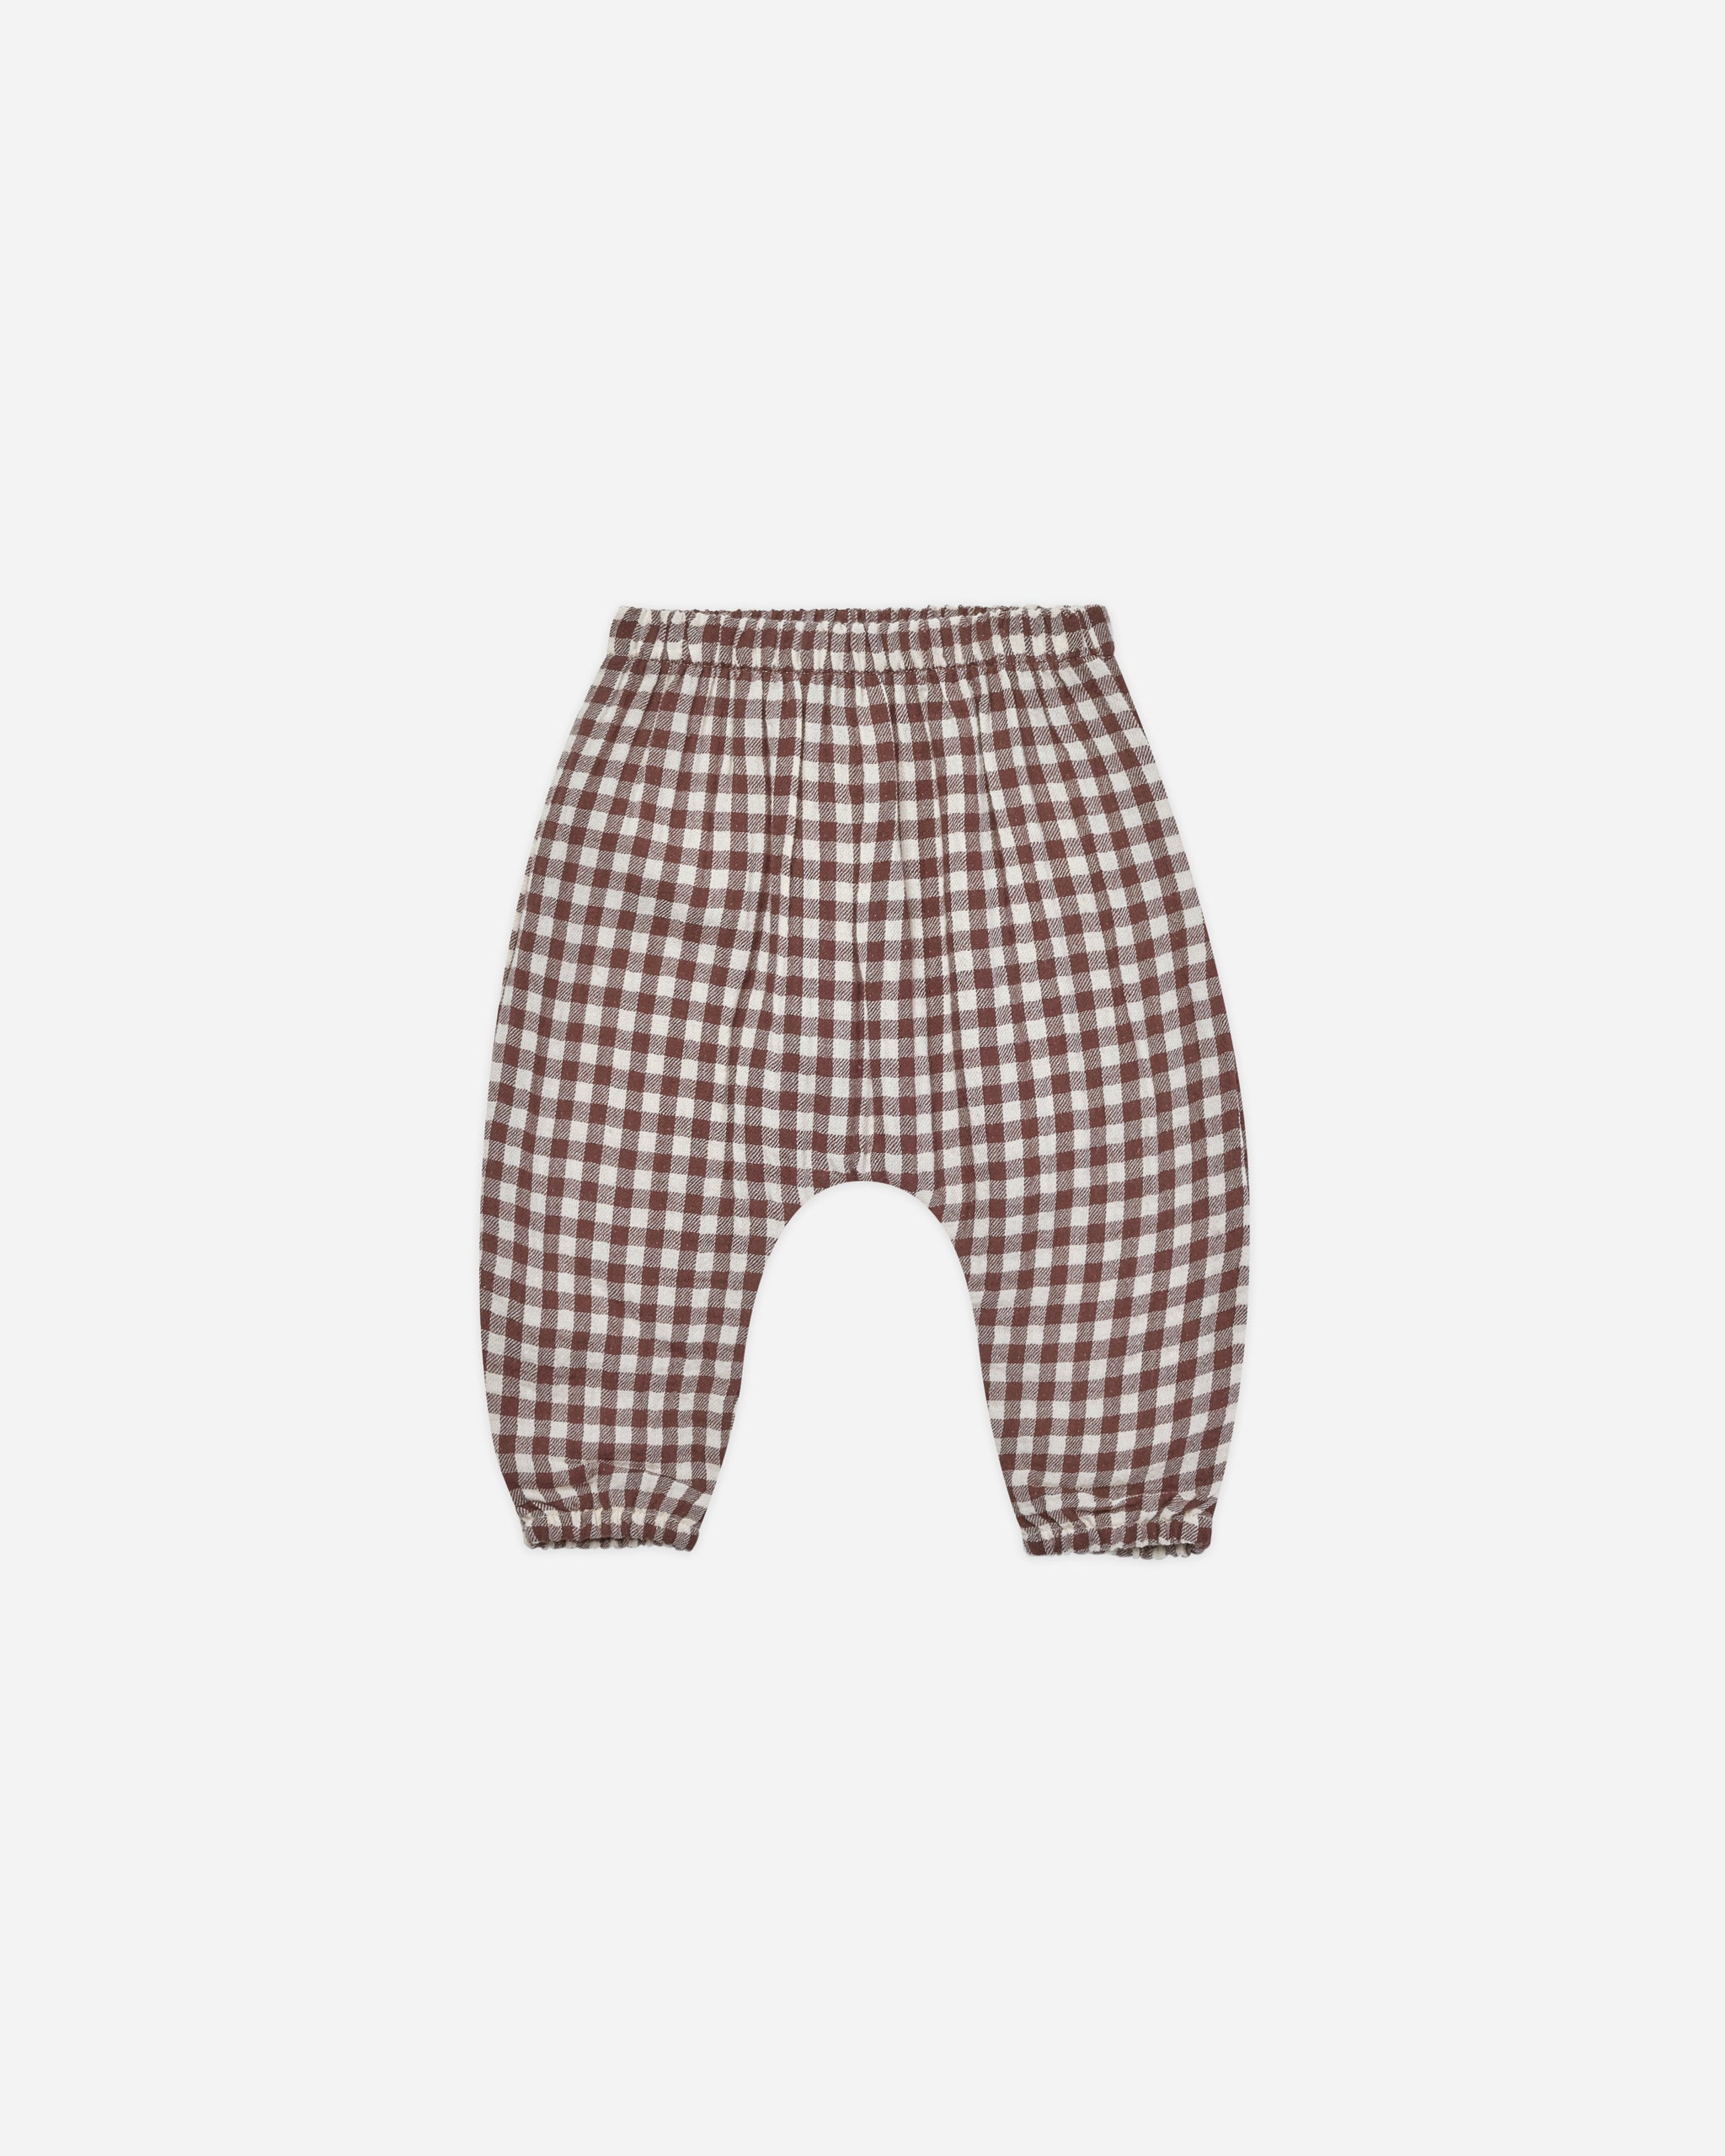 Woven Pant || Plum Gingham - Rylee + Cru | Kids Clothes | Trendy Baby Clothes | Modern Infant Outfits |